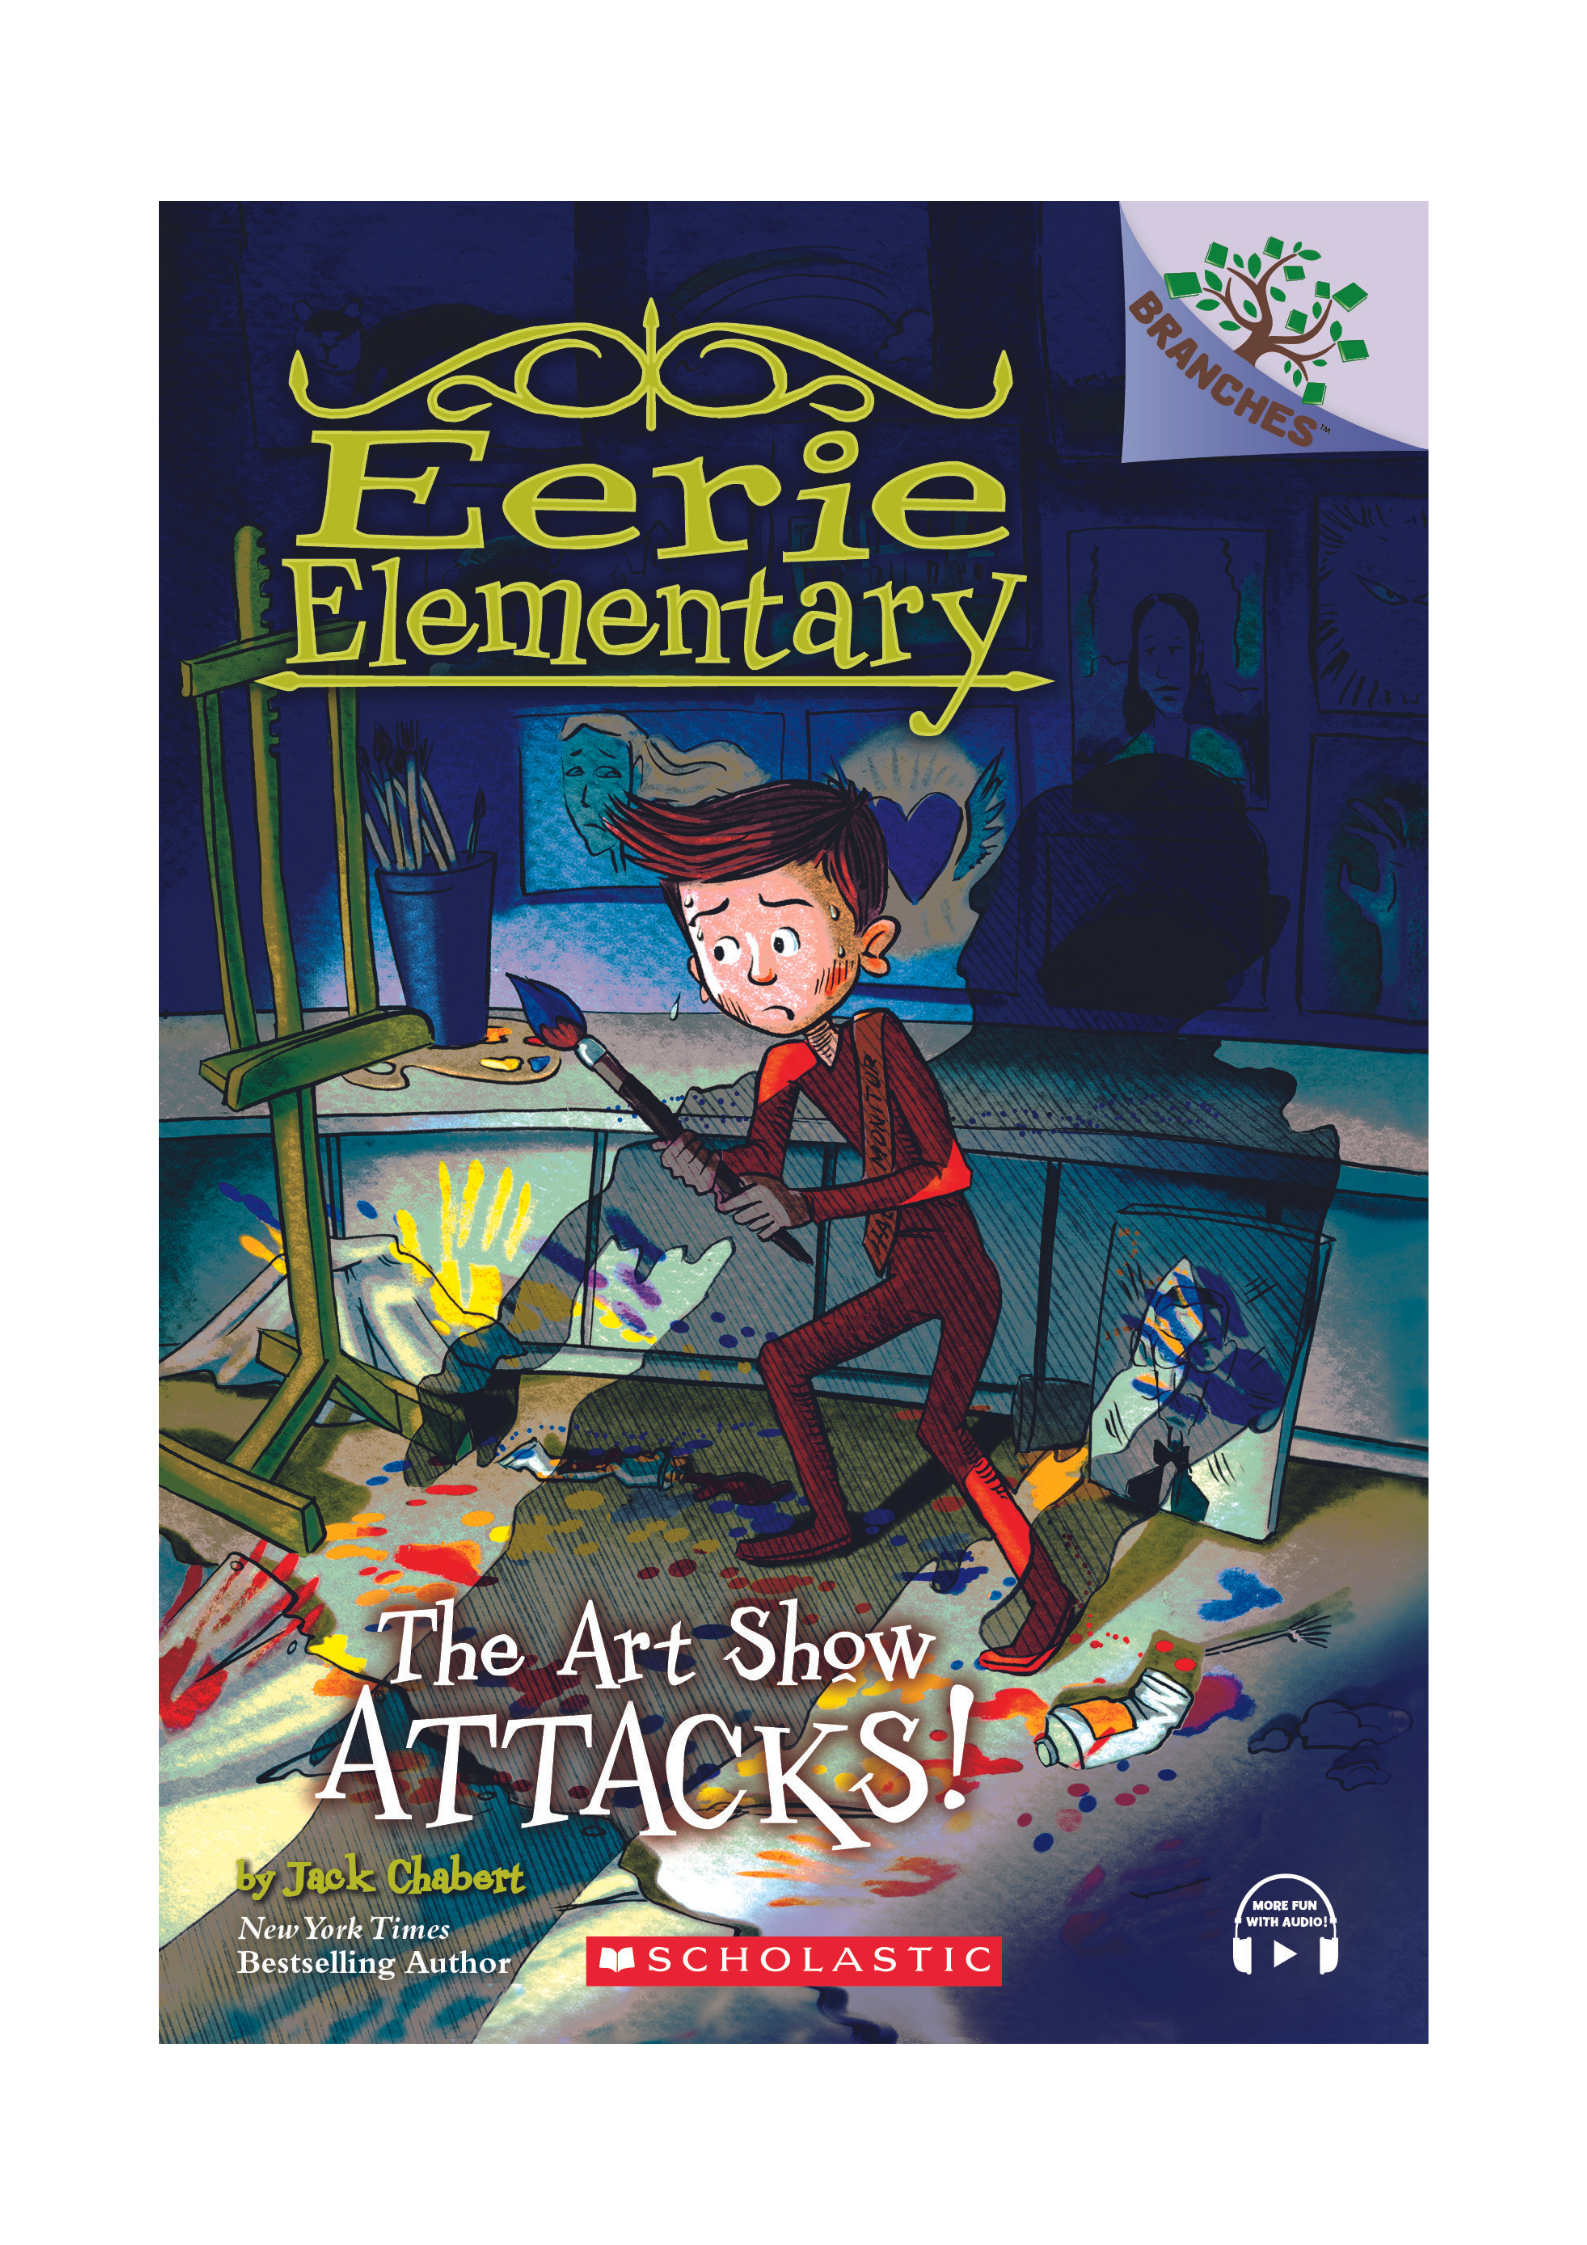 Branches – Eerie Elementary #9: The Art Show Attacks!